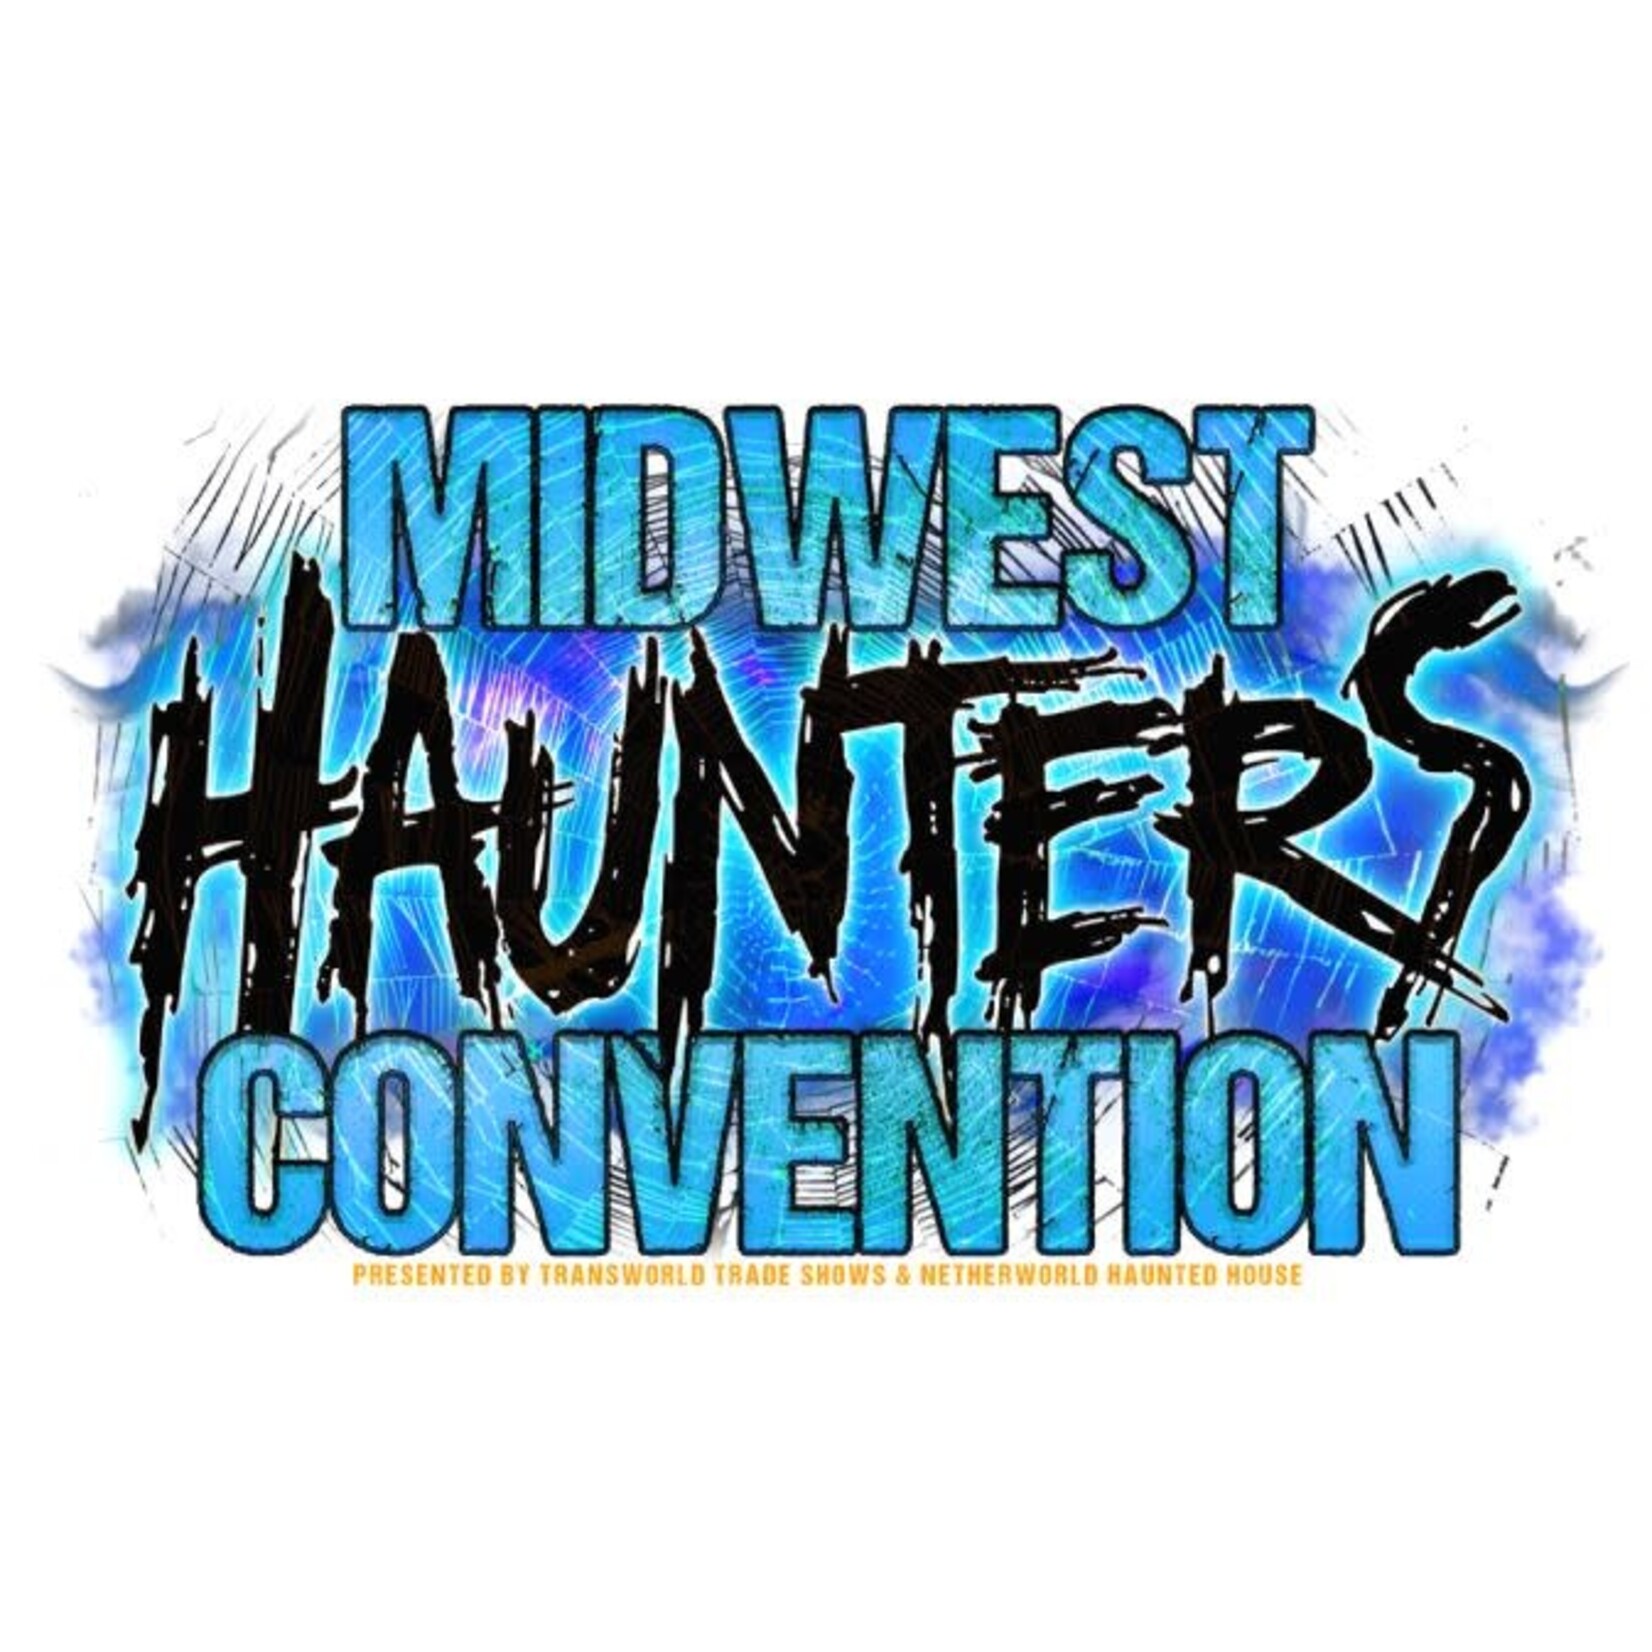 Midwest Haunters Convention by Haunted Trade Shows LLC Midwest Haunters Convention by Haunted Trade Shows LLC-Rosemont $40 Admission-Sun 6/11